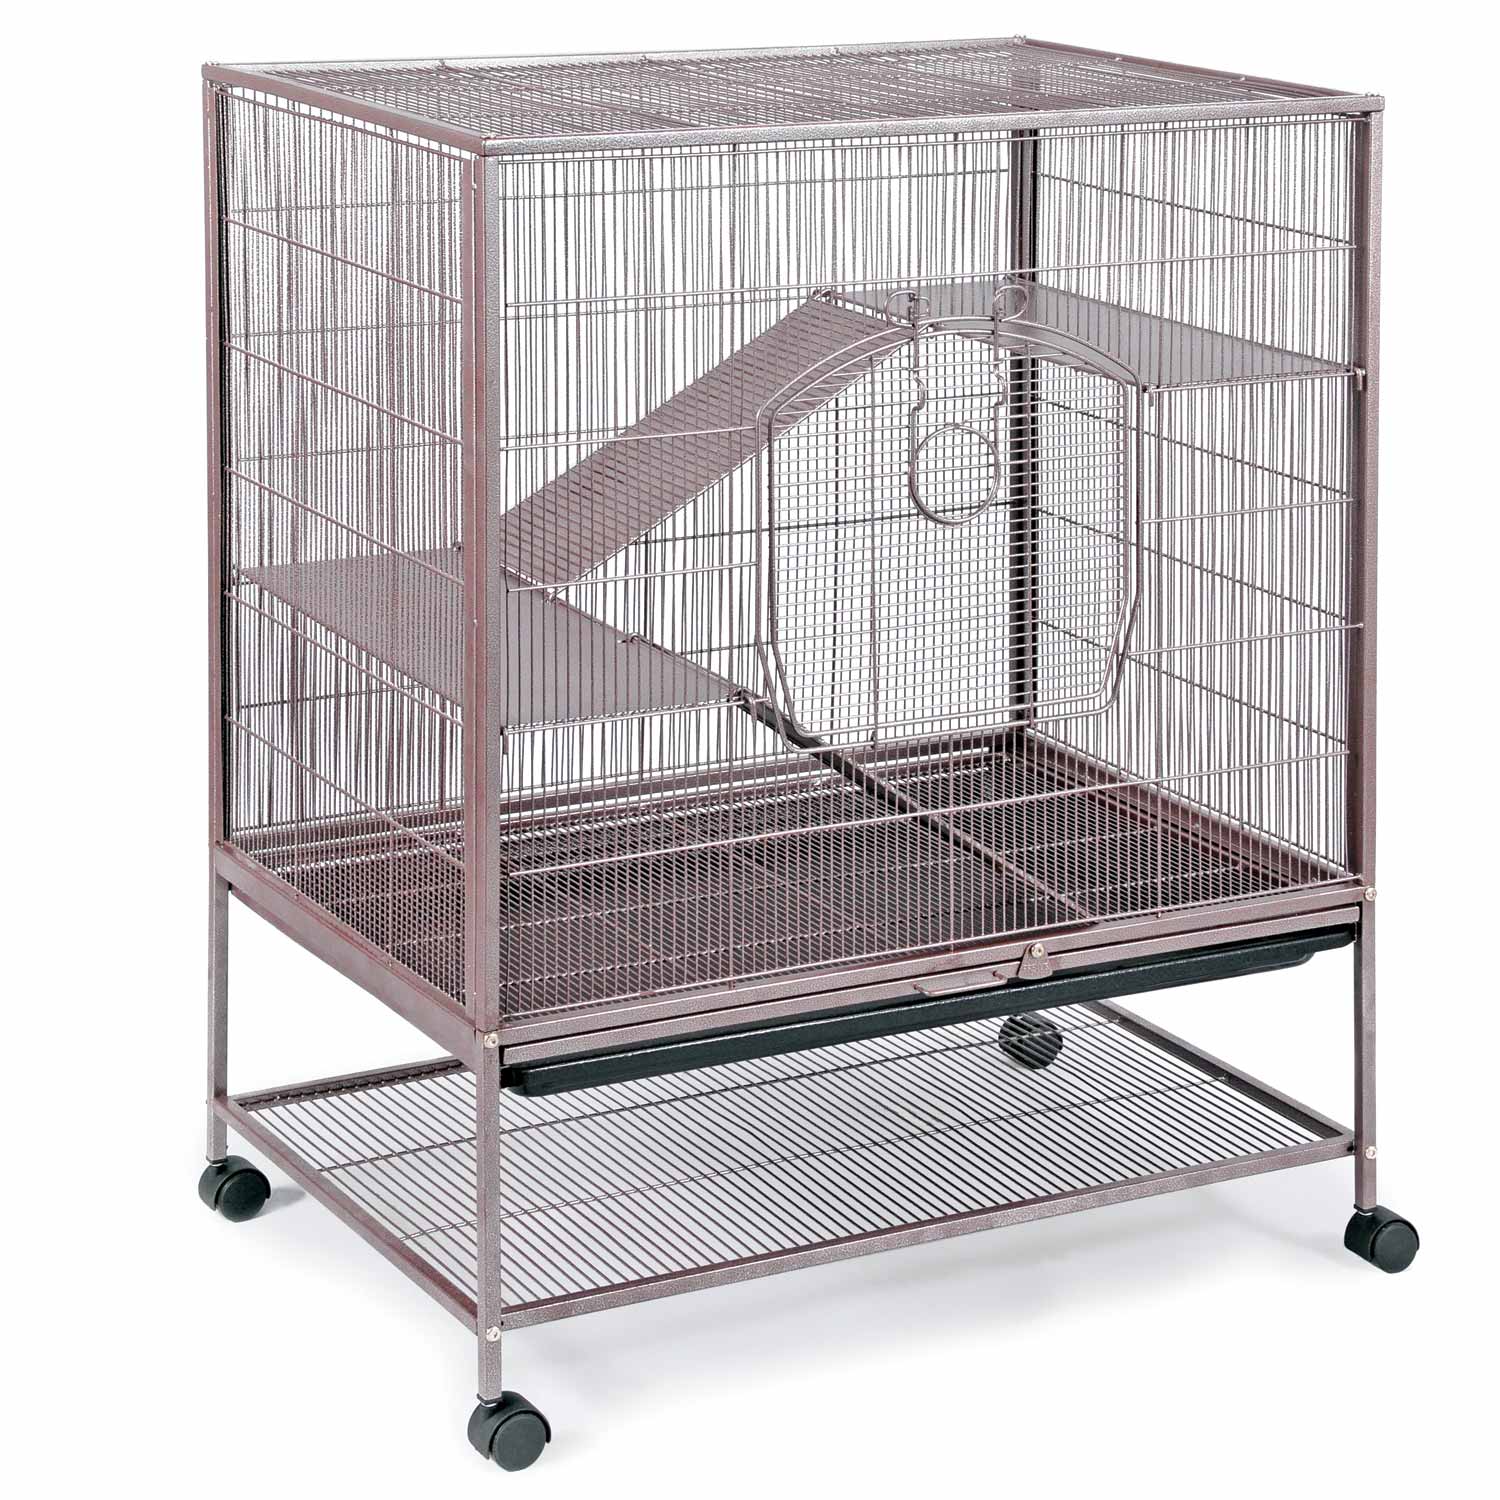 rat cages for 2 rats